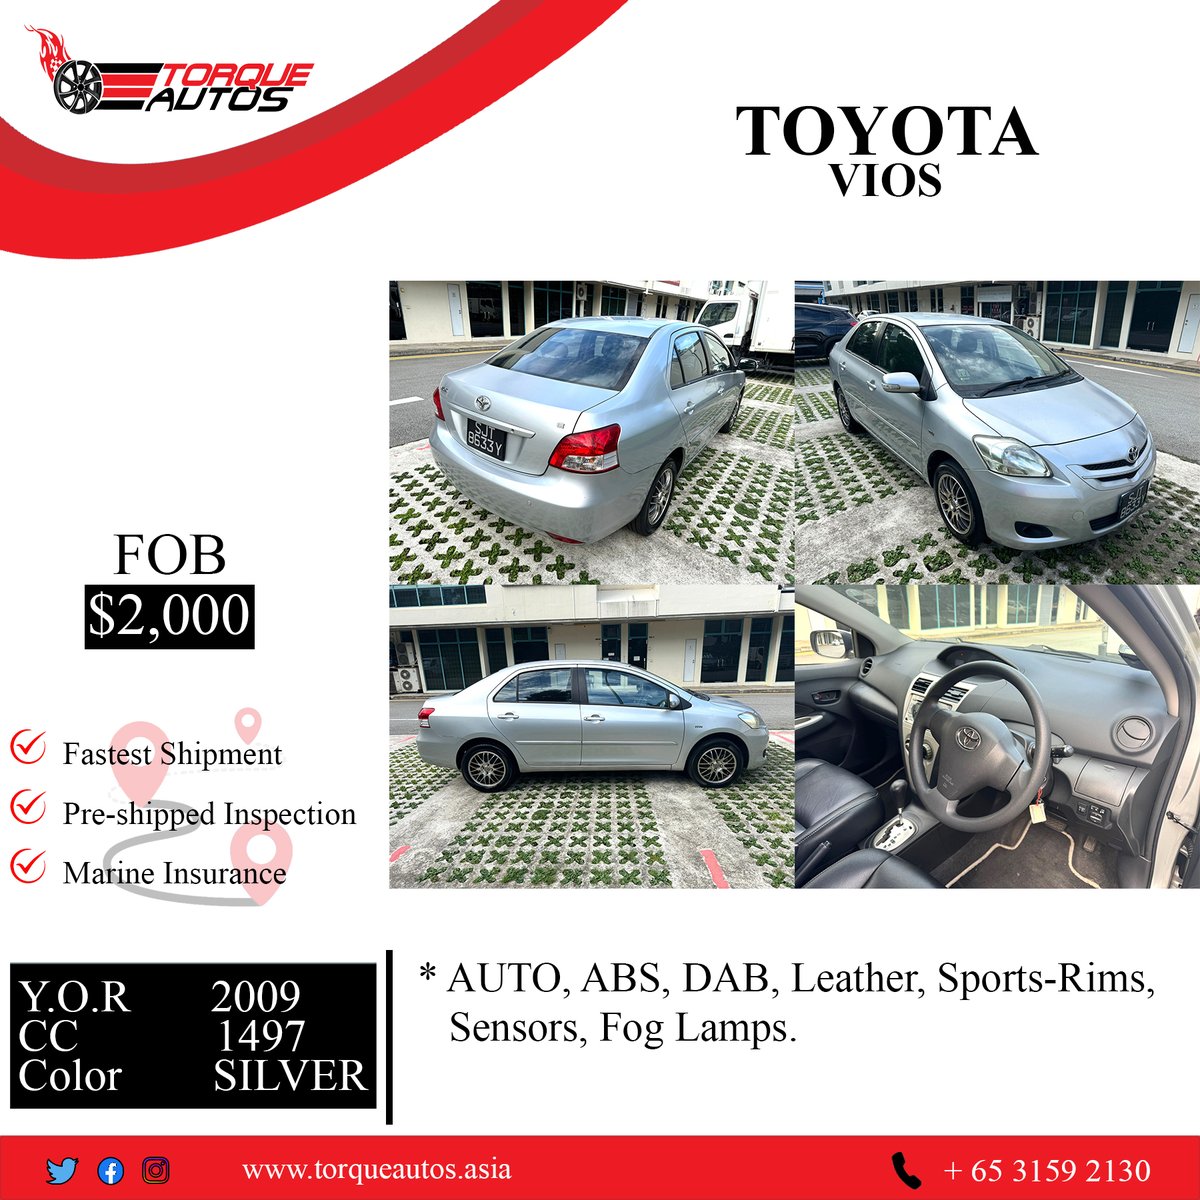 TOYOTA VIOS
1.5L VVT-i 16 Valves Inline DOHC Engine
107BHP
Very Fuel Efficient
Smooth Auto-Trans
ABS
SRS-DAB
Sports Rims
Leather Seats
Knockdown Rear Seats
Sensors
Retractable and Indicating Side Mirrors #TorqueAutos #Toyota #VIOS #sedan #CarsForSale #familycar #sale #vioscar